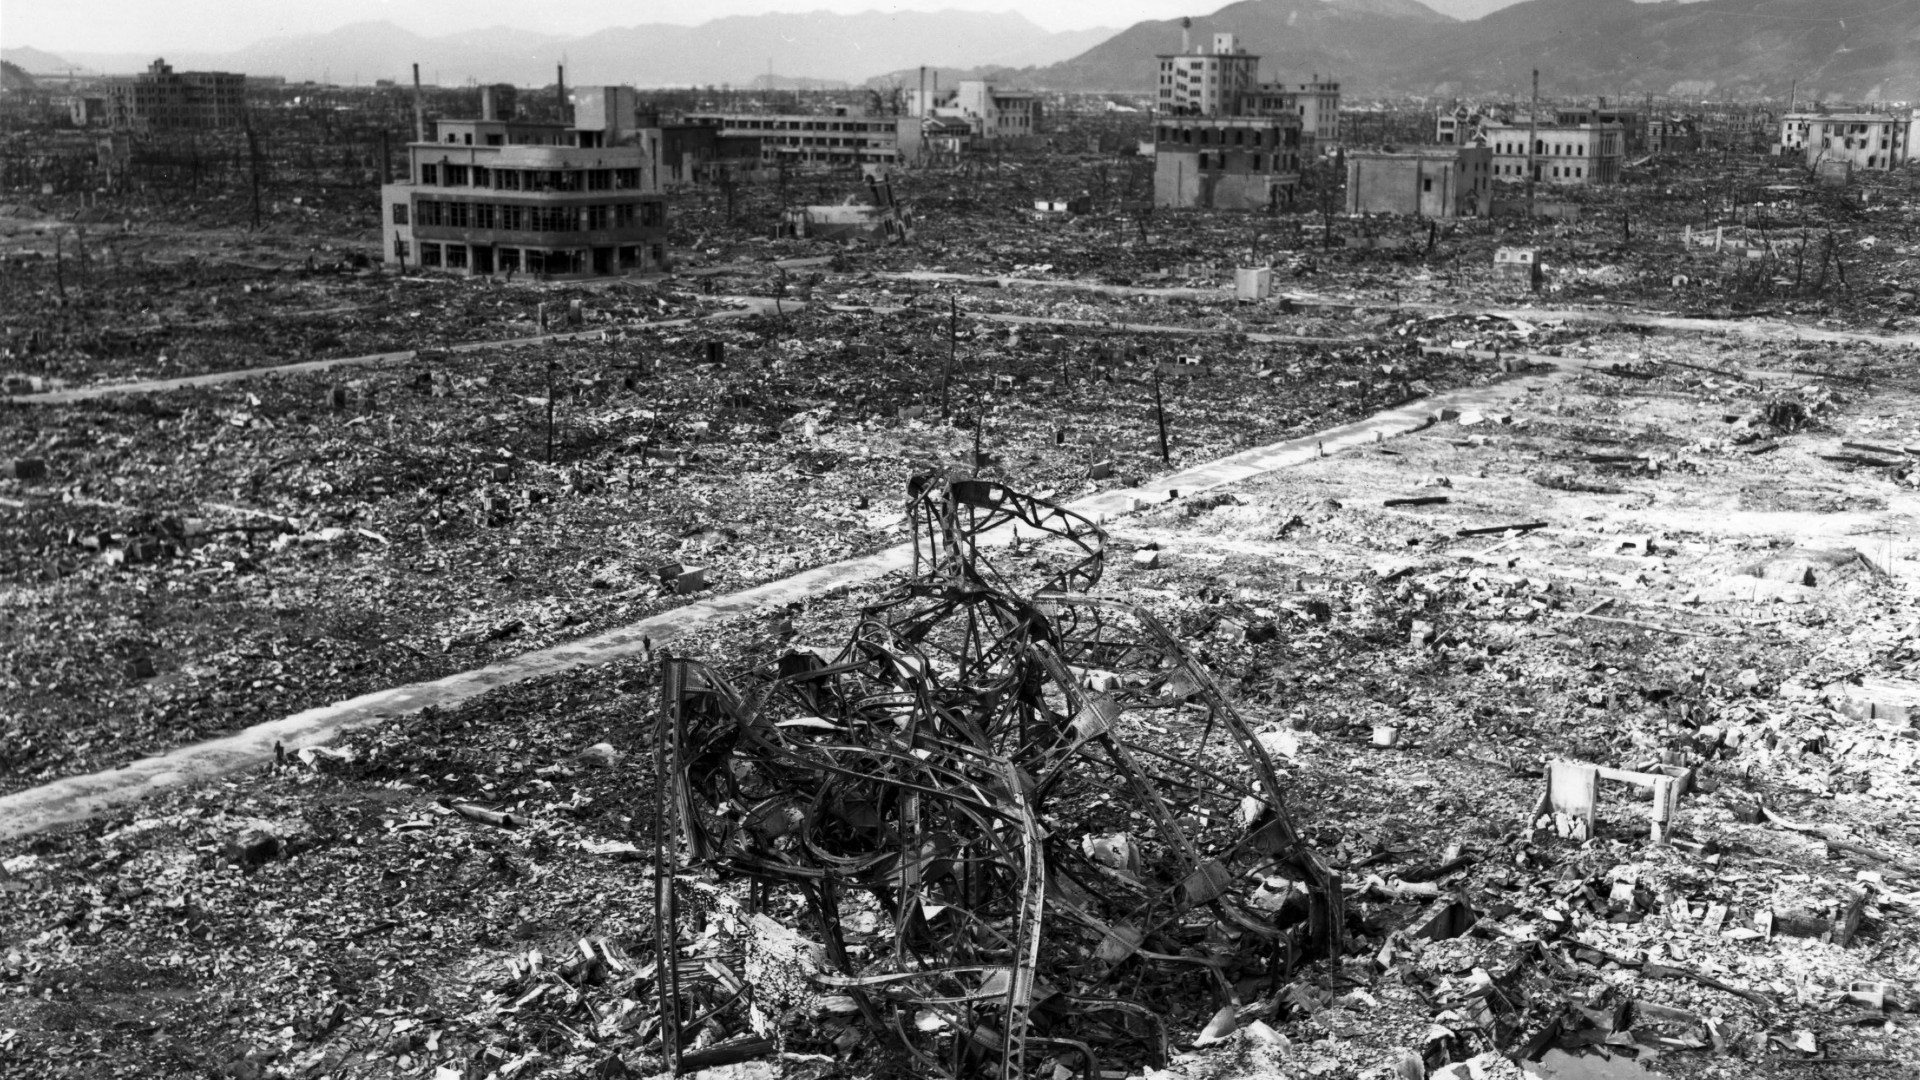 The aftermath of the Nagasaki bombing